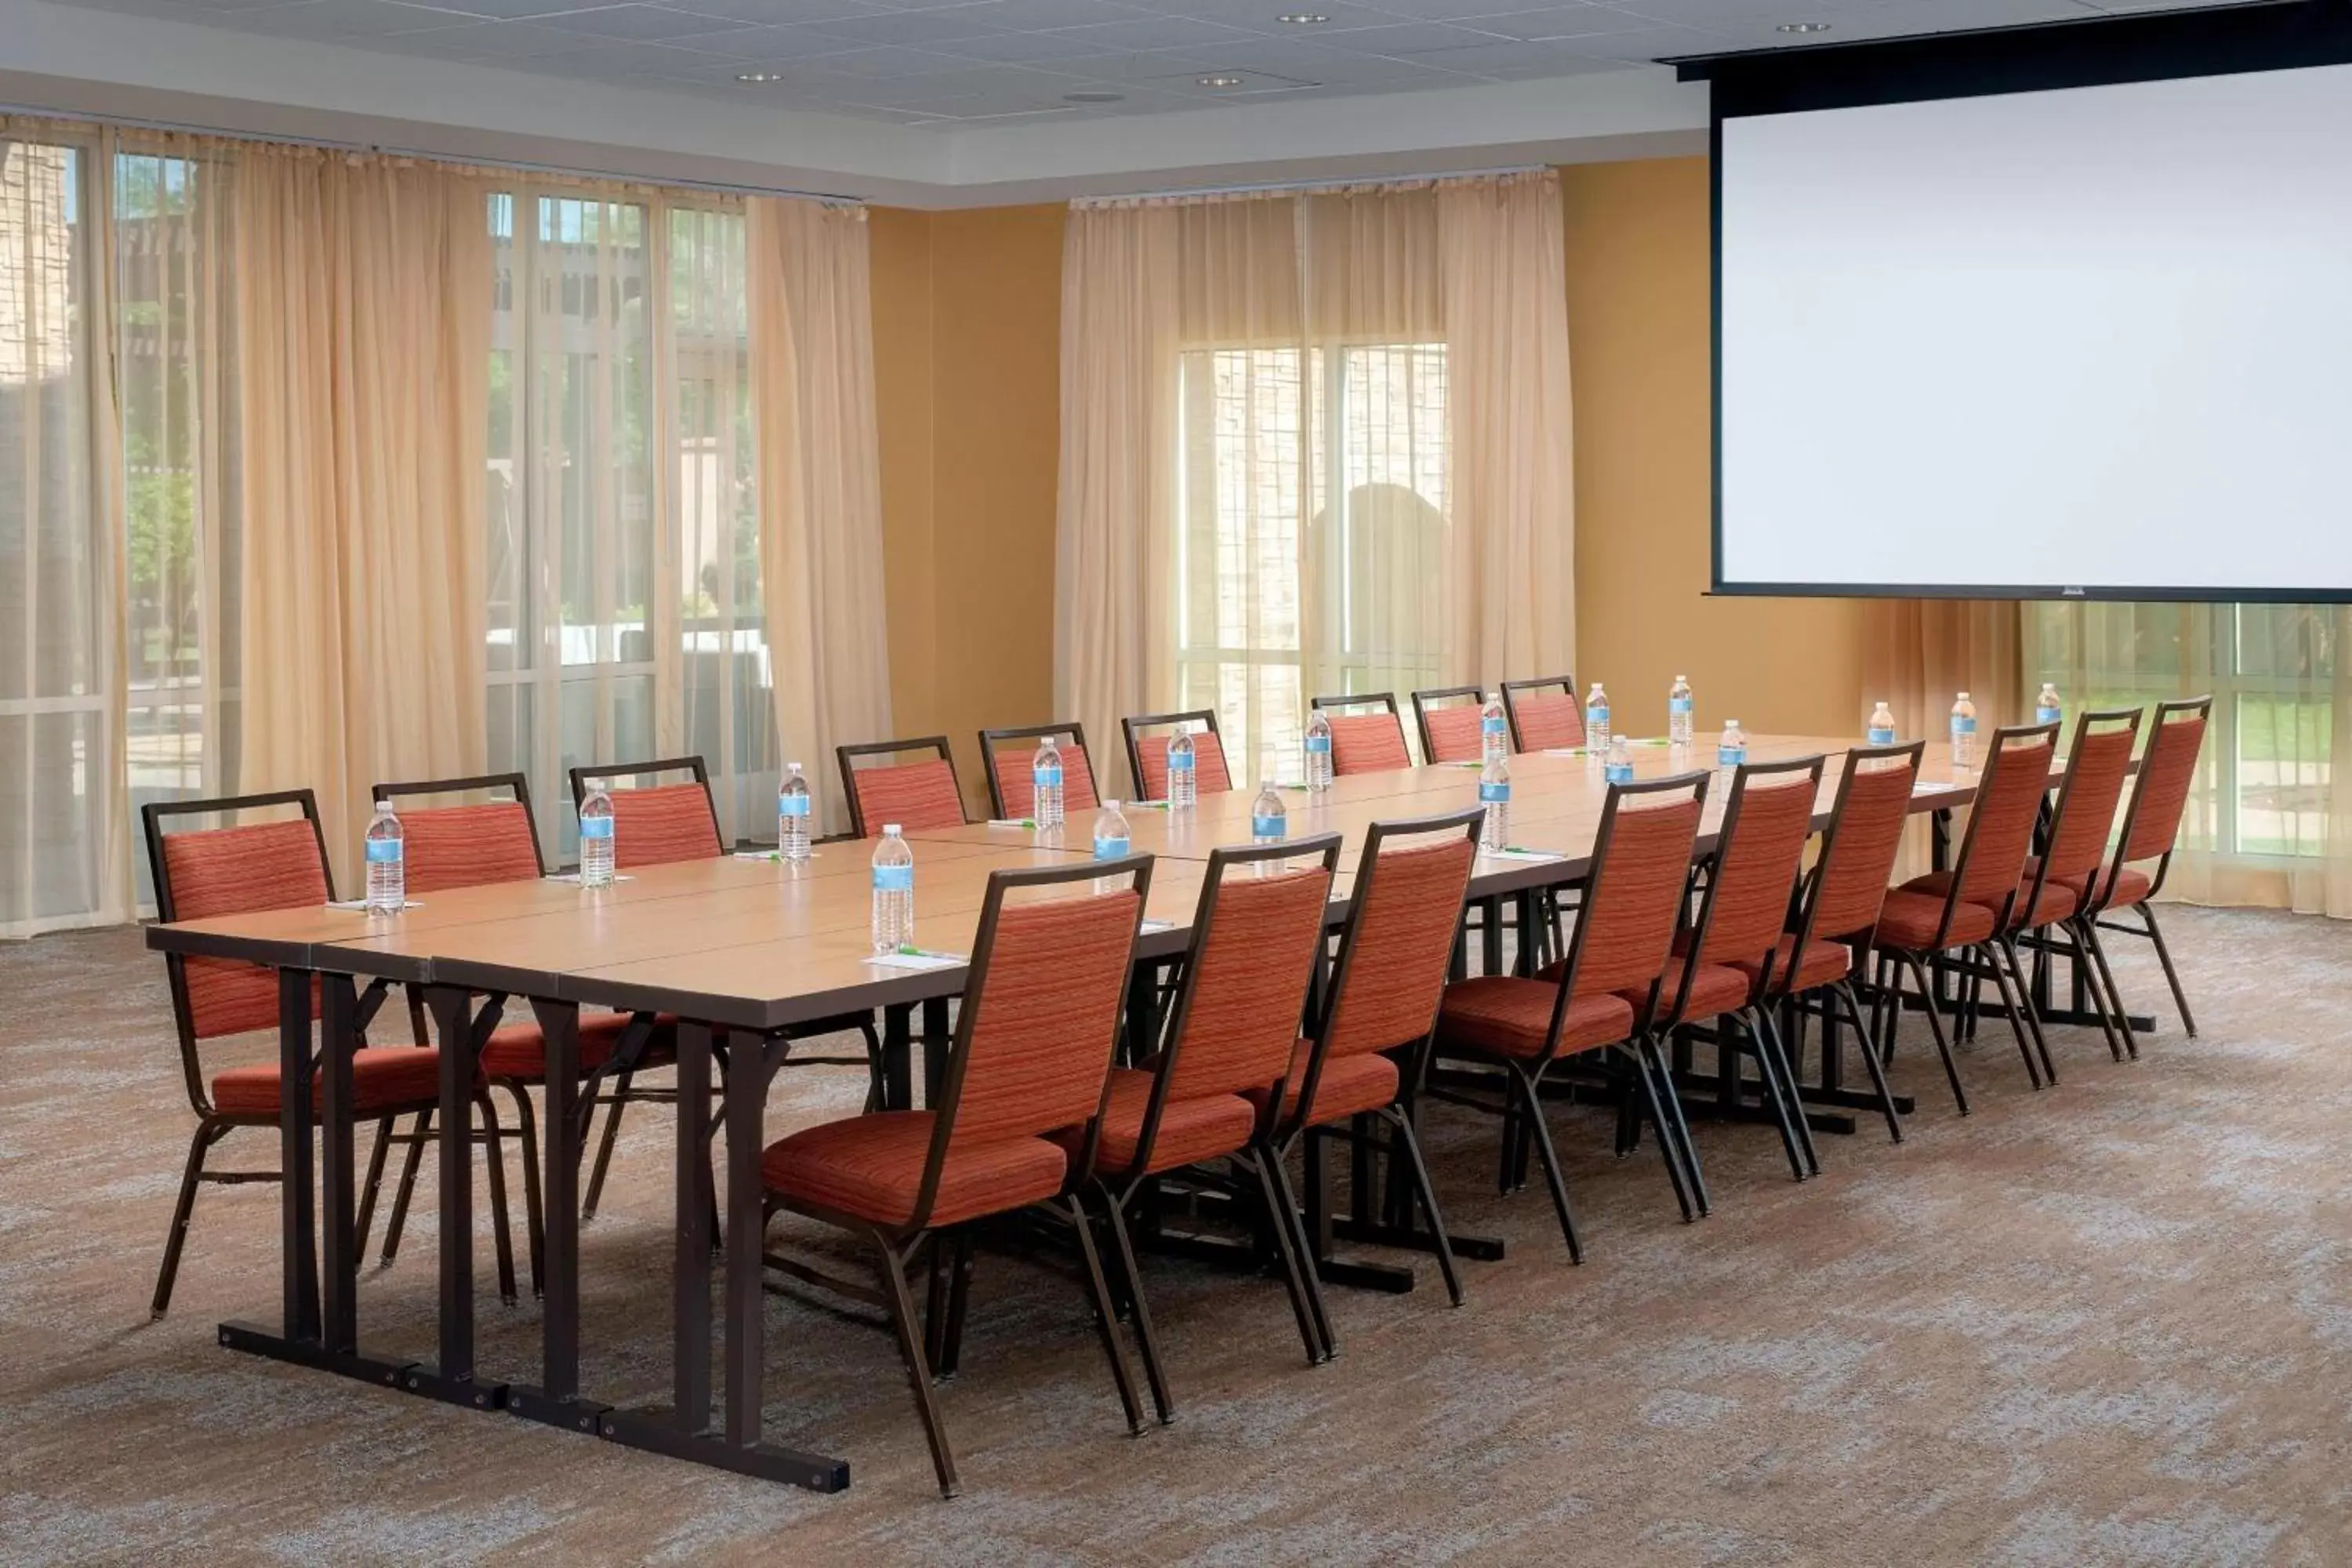 Meeting/conference room in Courtyard Houston NW/290 Corridor